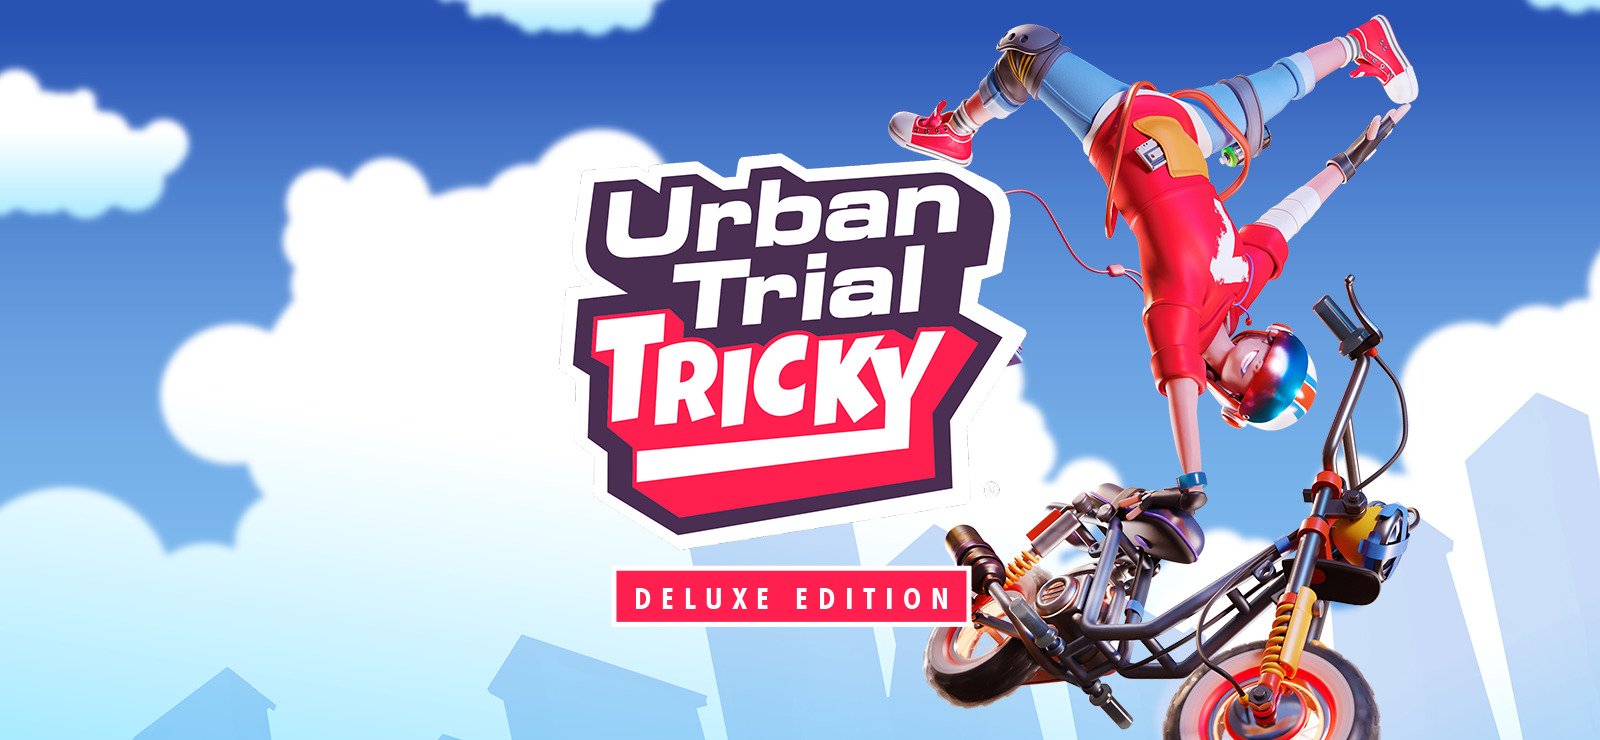 Urban Trial Tricky Deluxe Edition 6